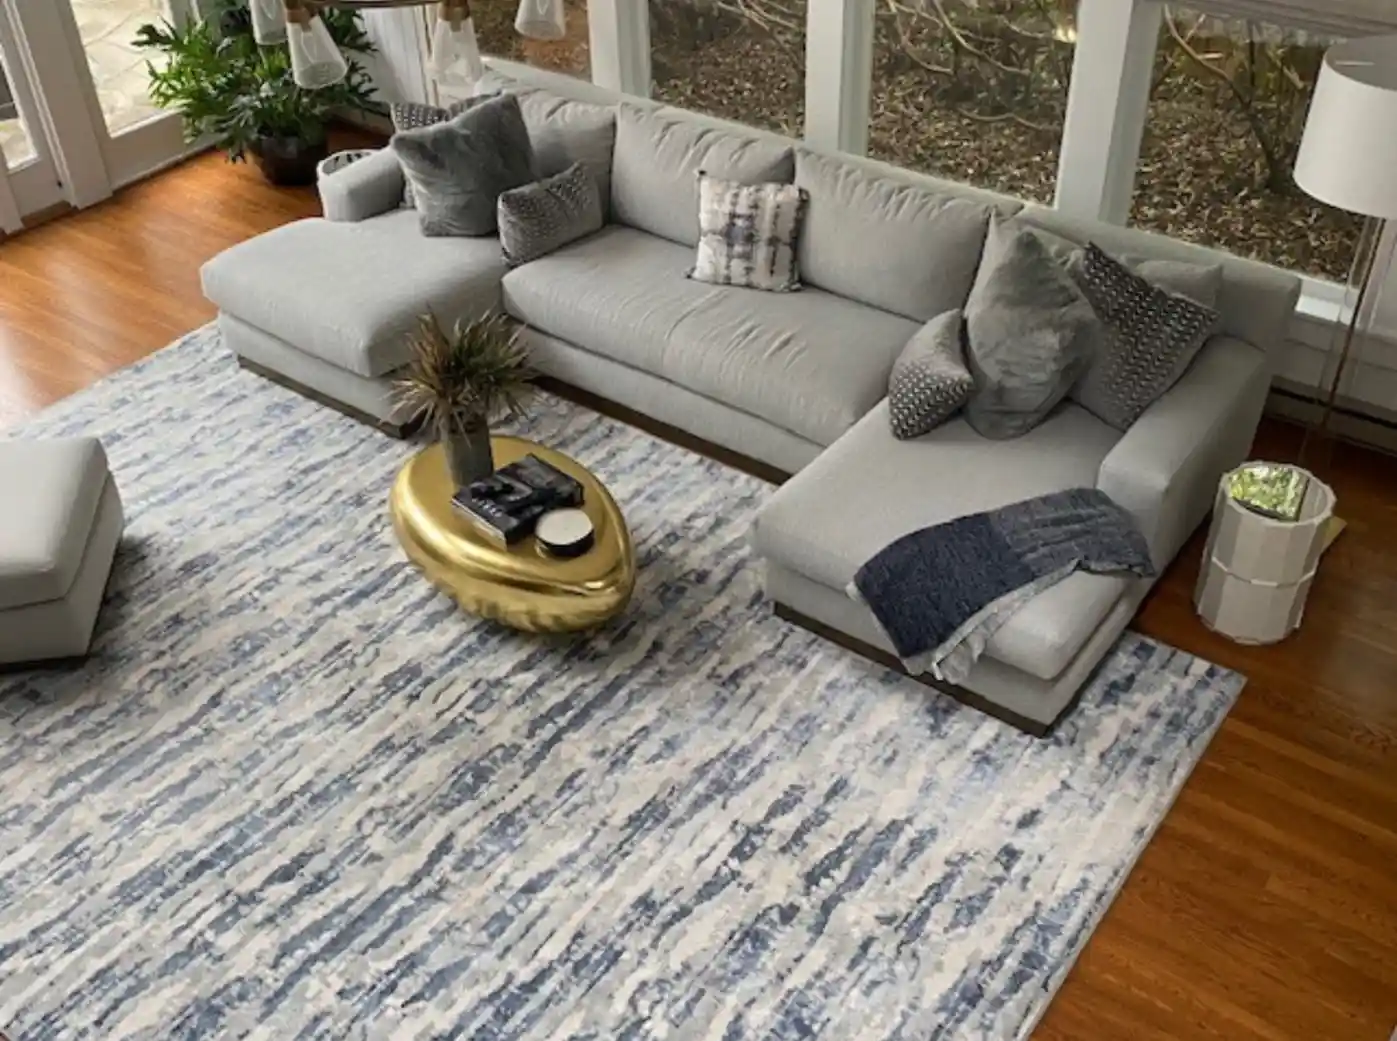 square Area Rug in living room